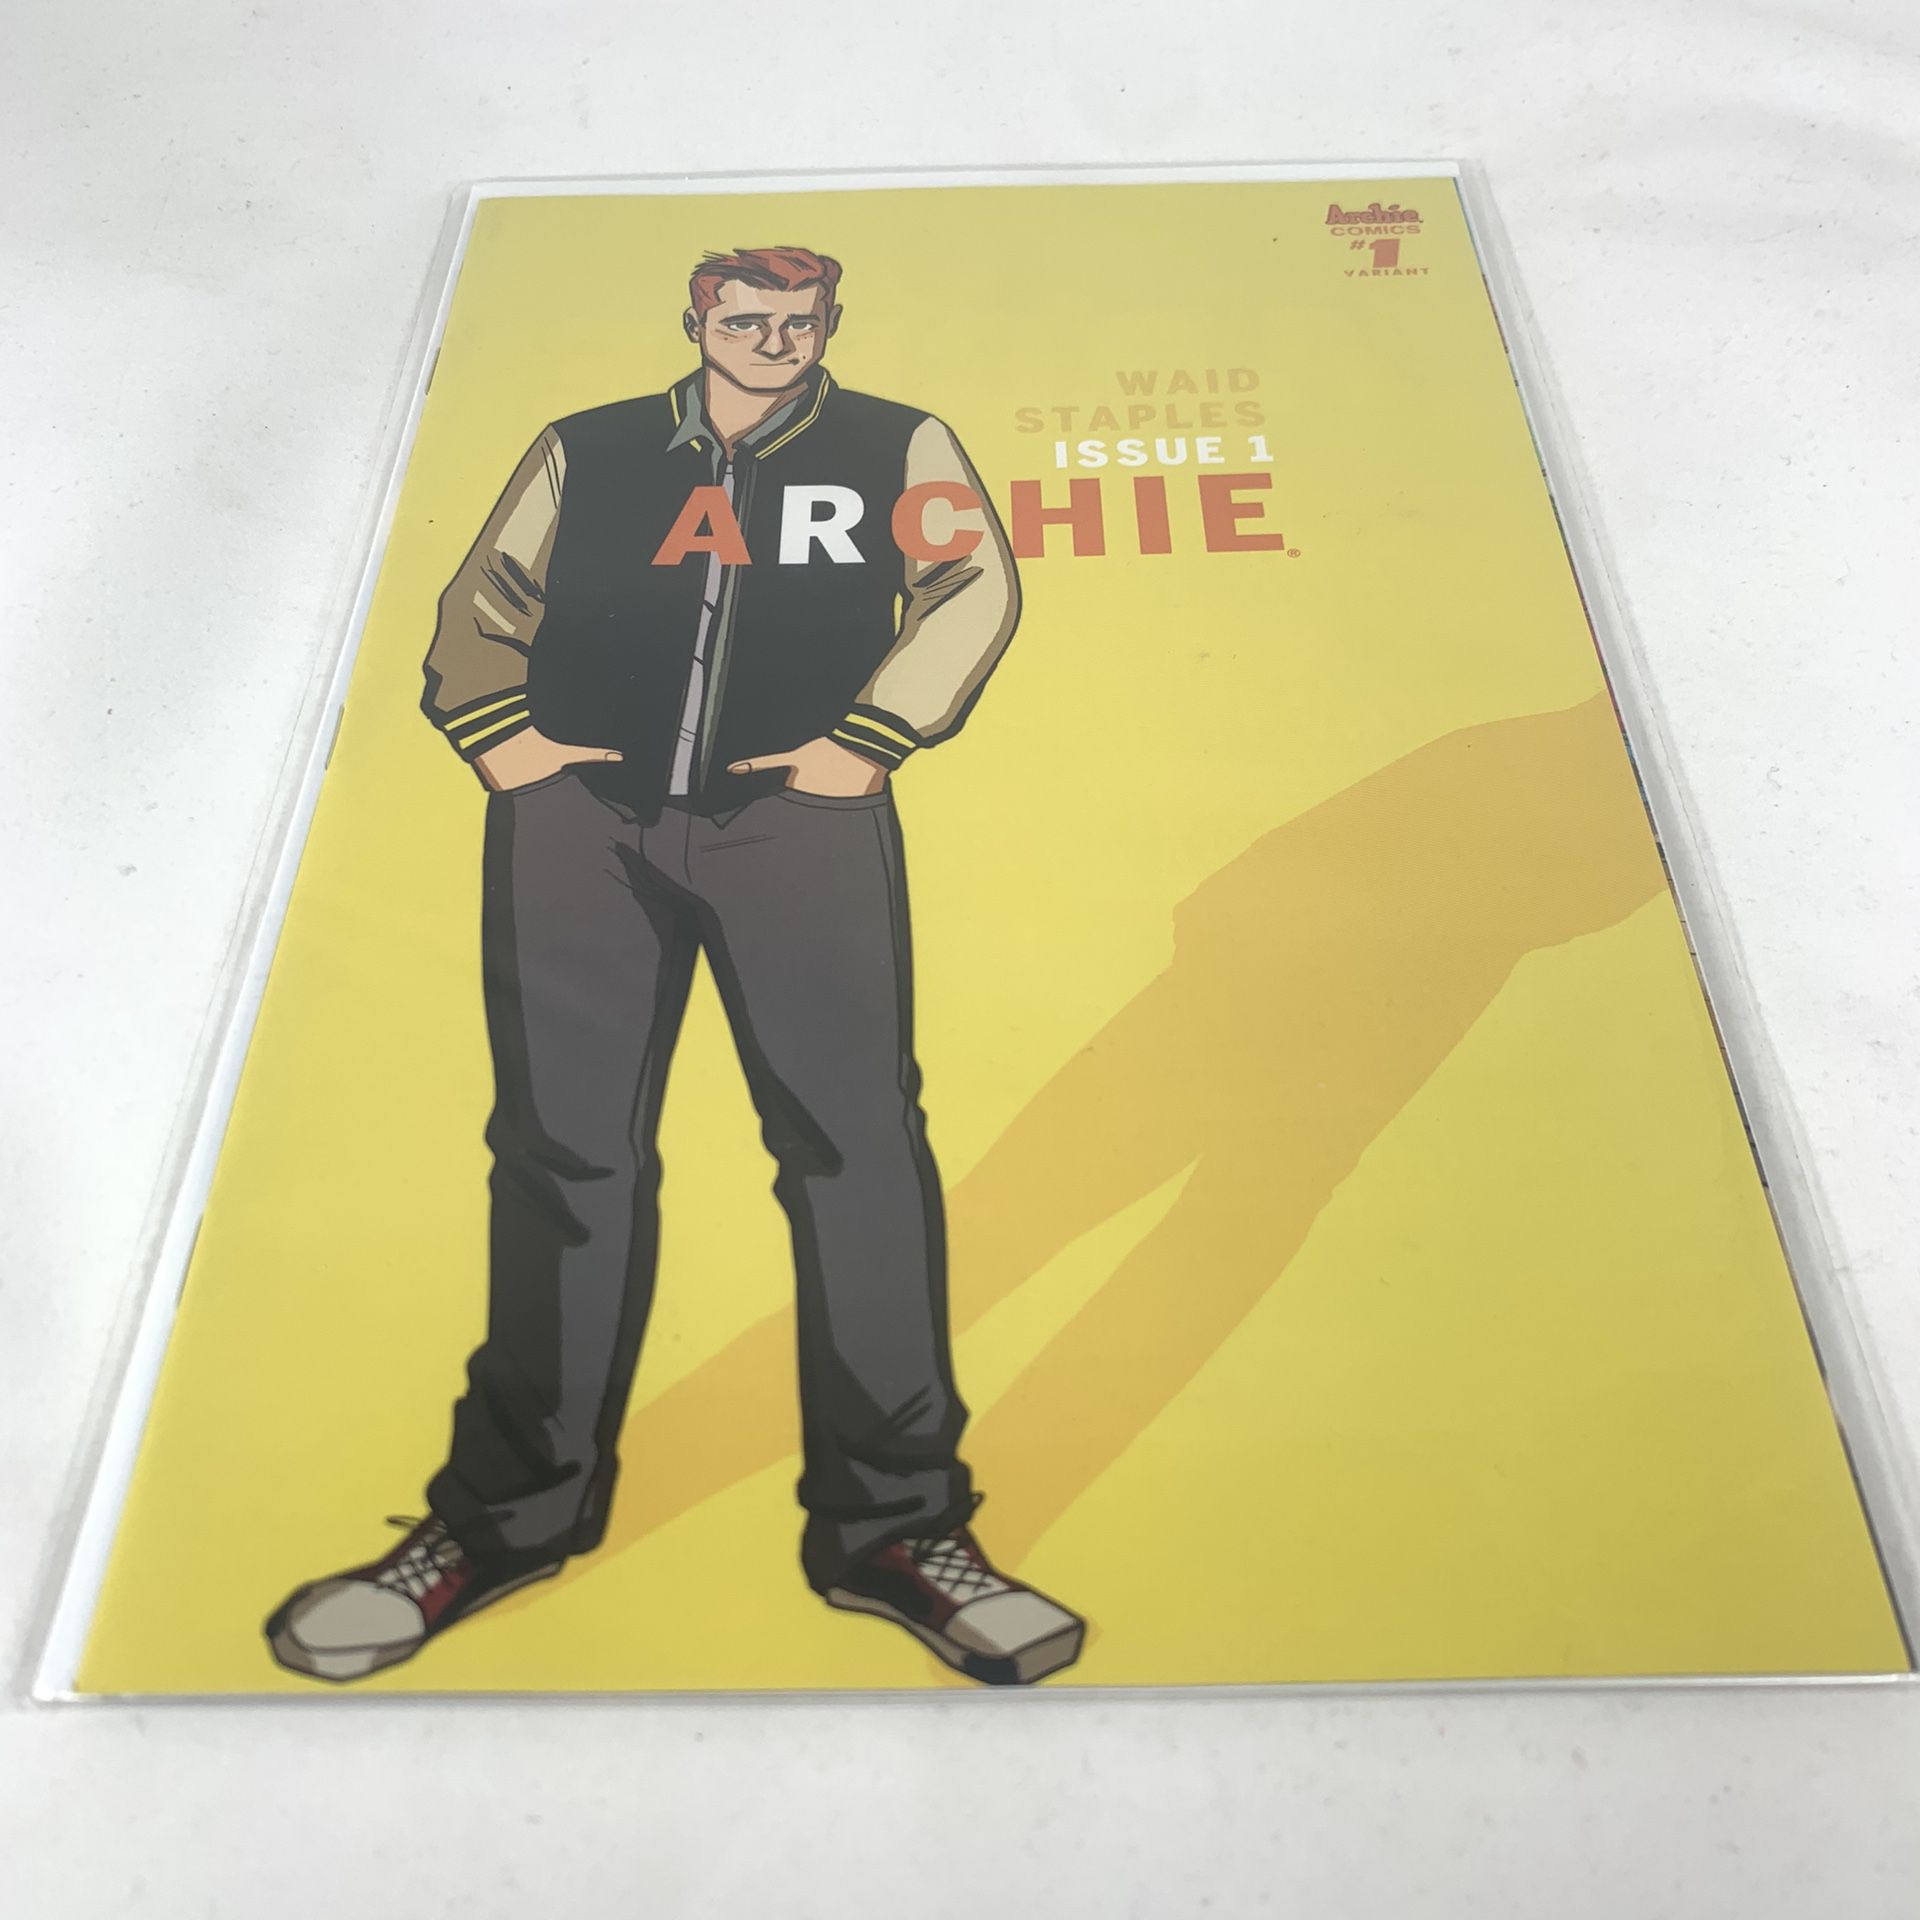 All New Archie #1 Variant Edition Archie Comics CB10947